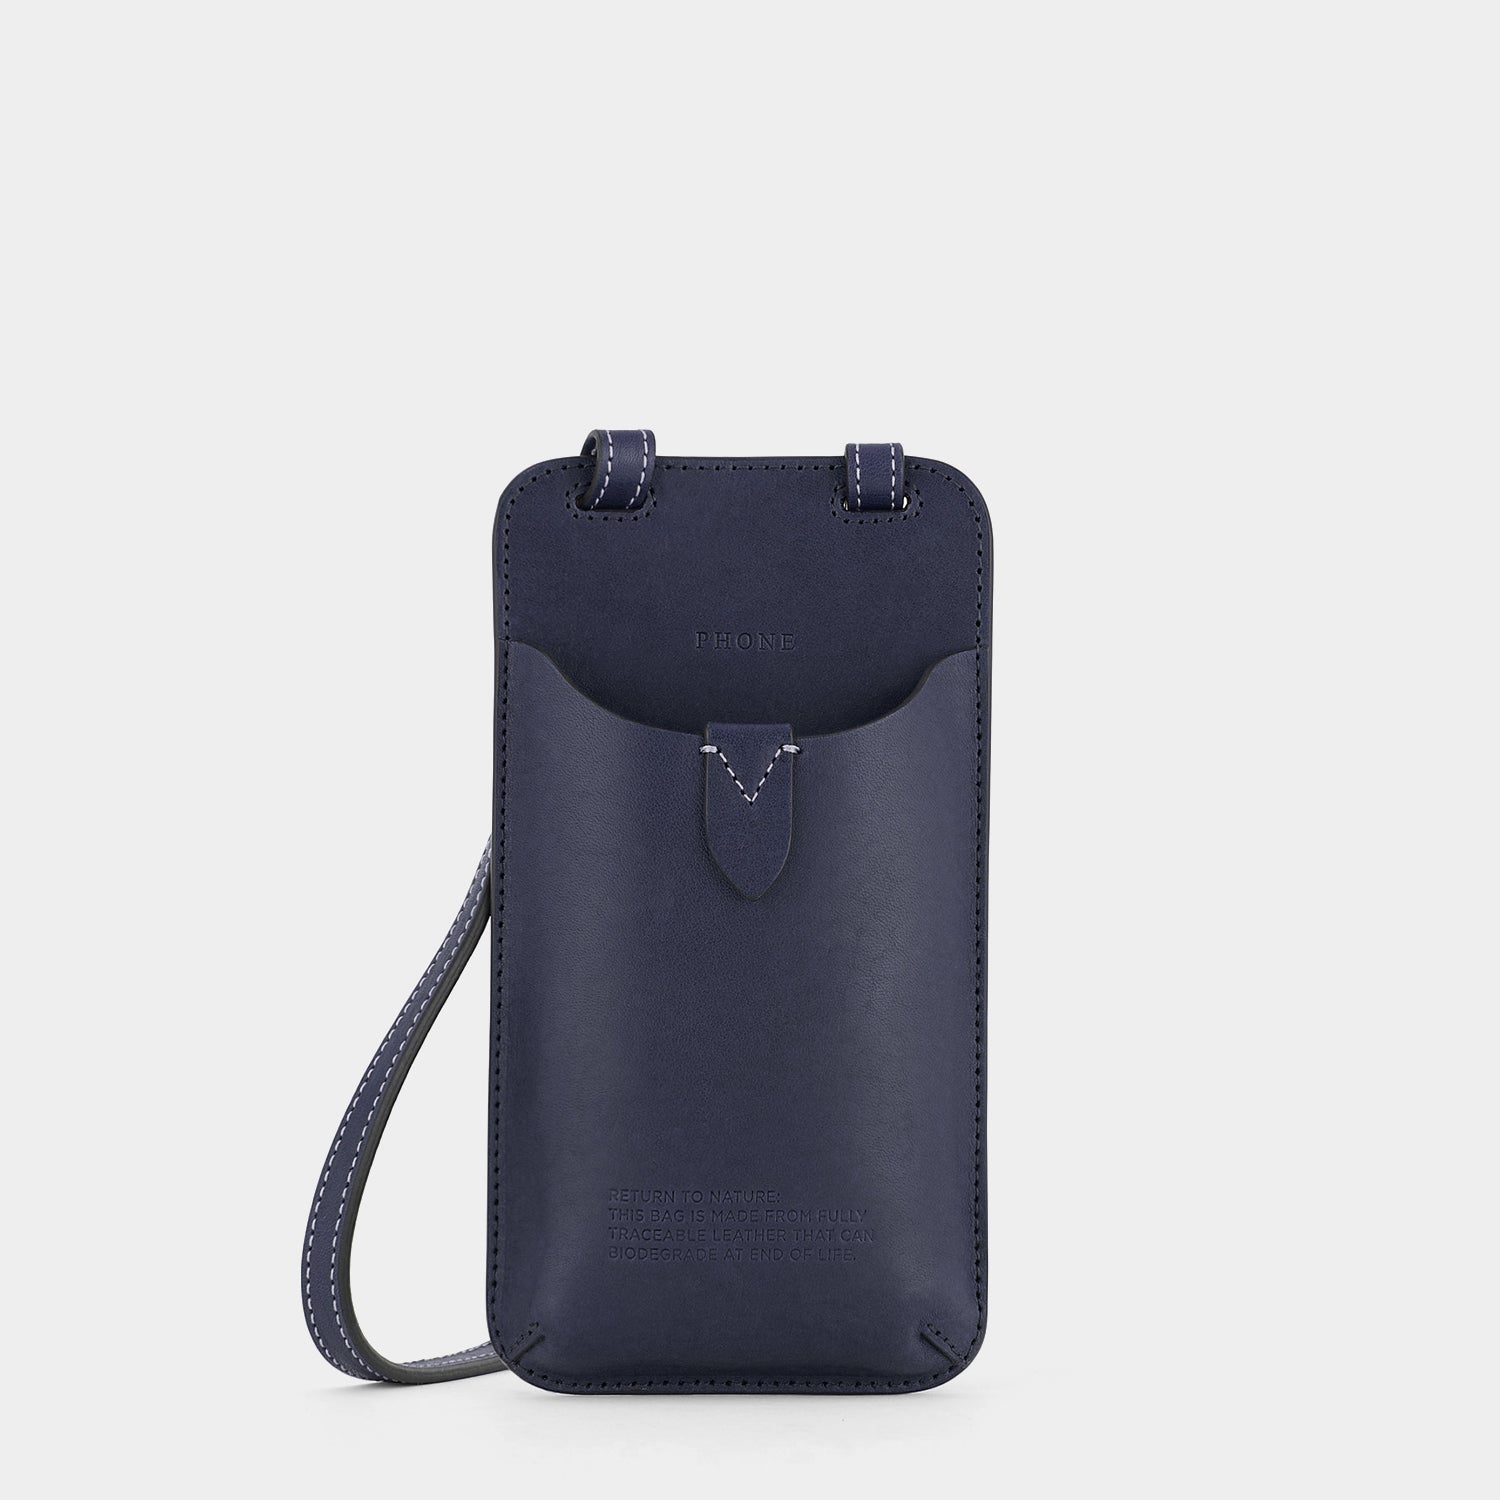 「Return to Nature」 スマホ ポーチ -

                  
                    Compostable Leather in Dark Olive -
                  

                  Anya Hindmarch JP
